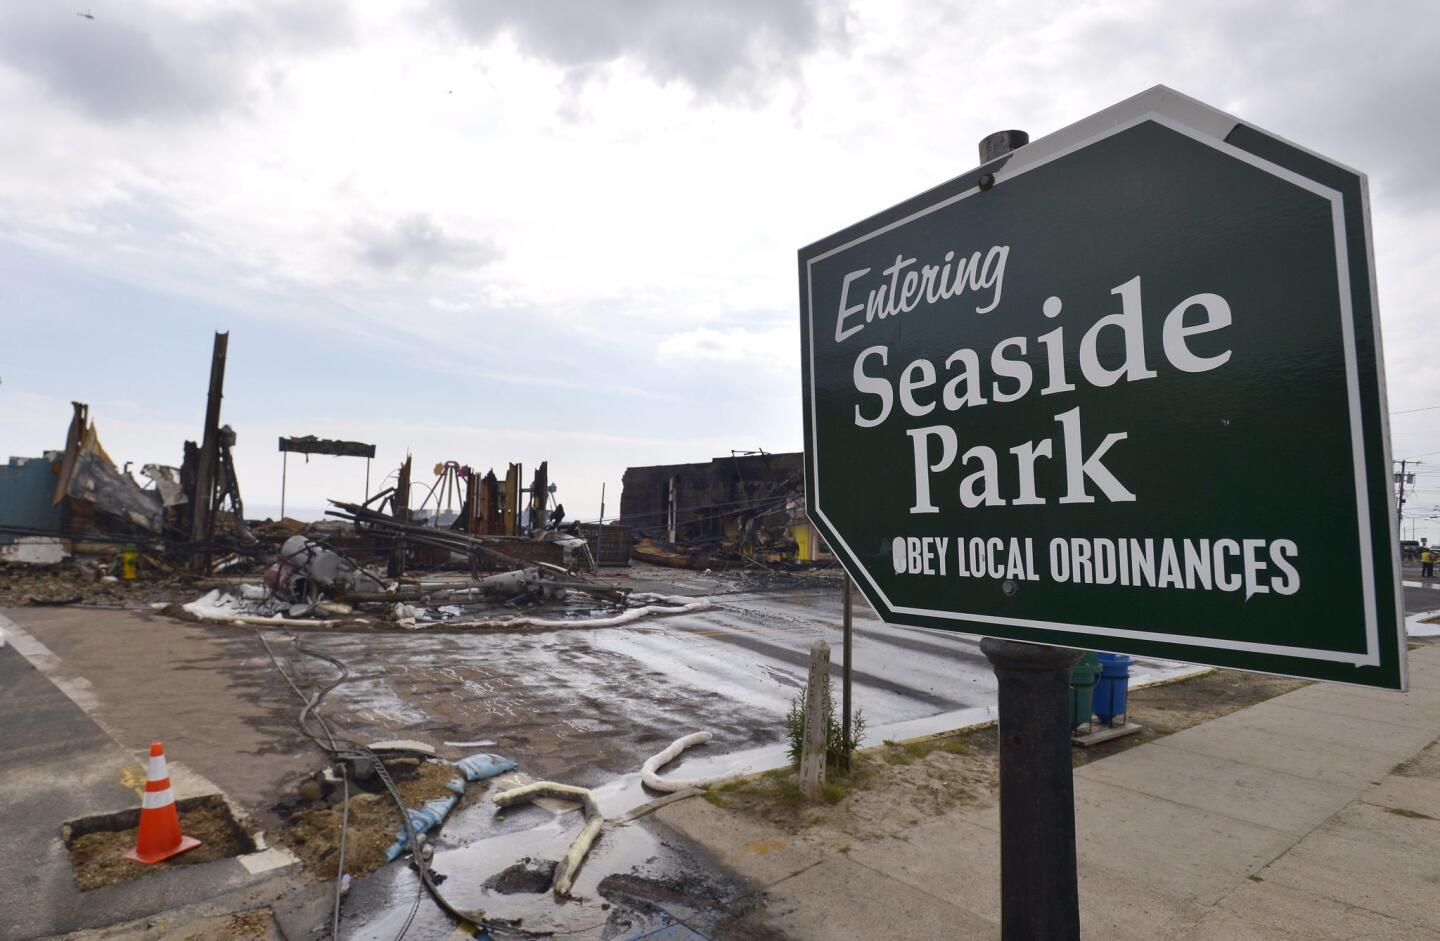 A sign for Seaside Park stands undamaged as firefighters continue working to extinguish embers after a fire destroyed dozens of businesses and attractions along the Jersey Shore boardwalk.